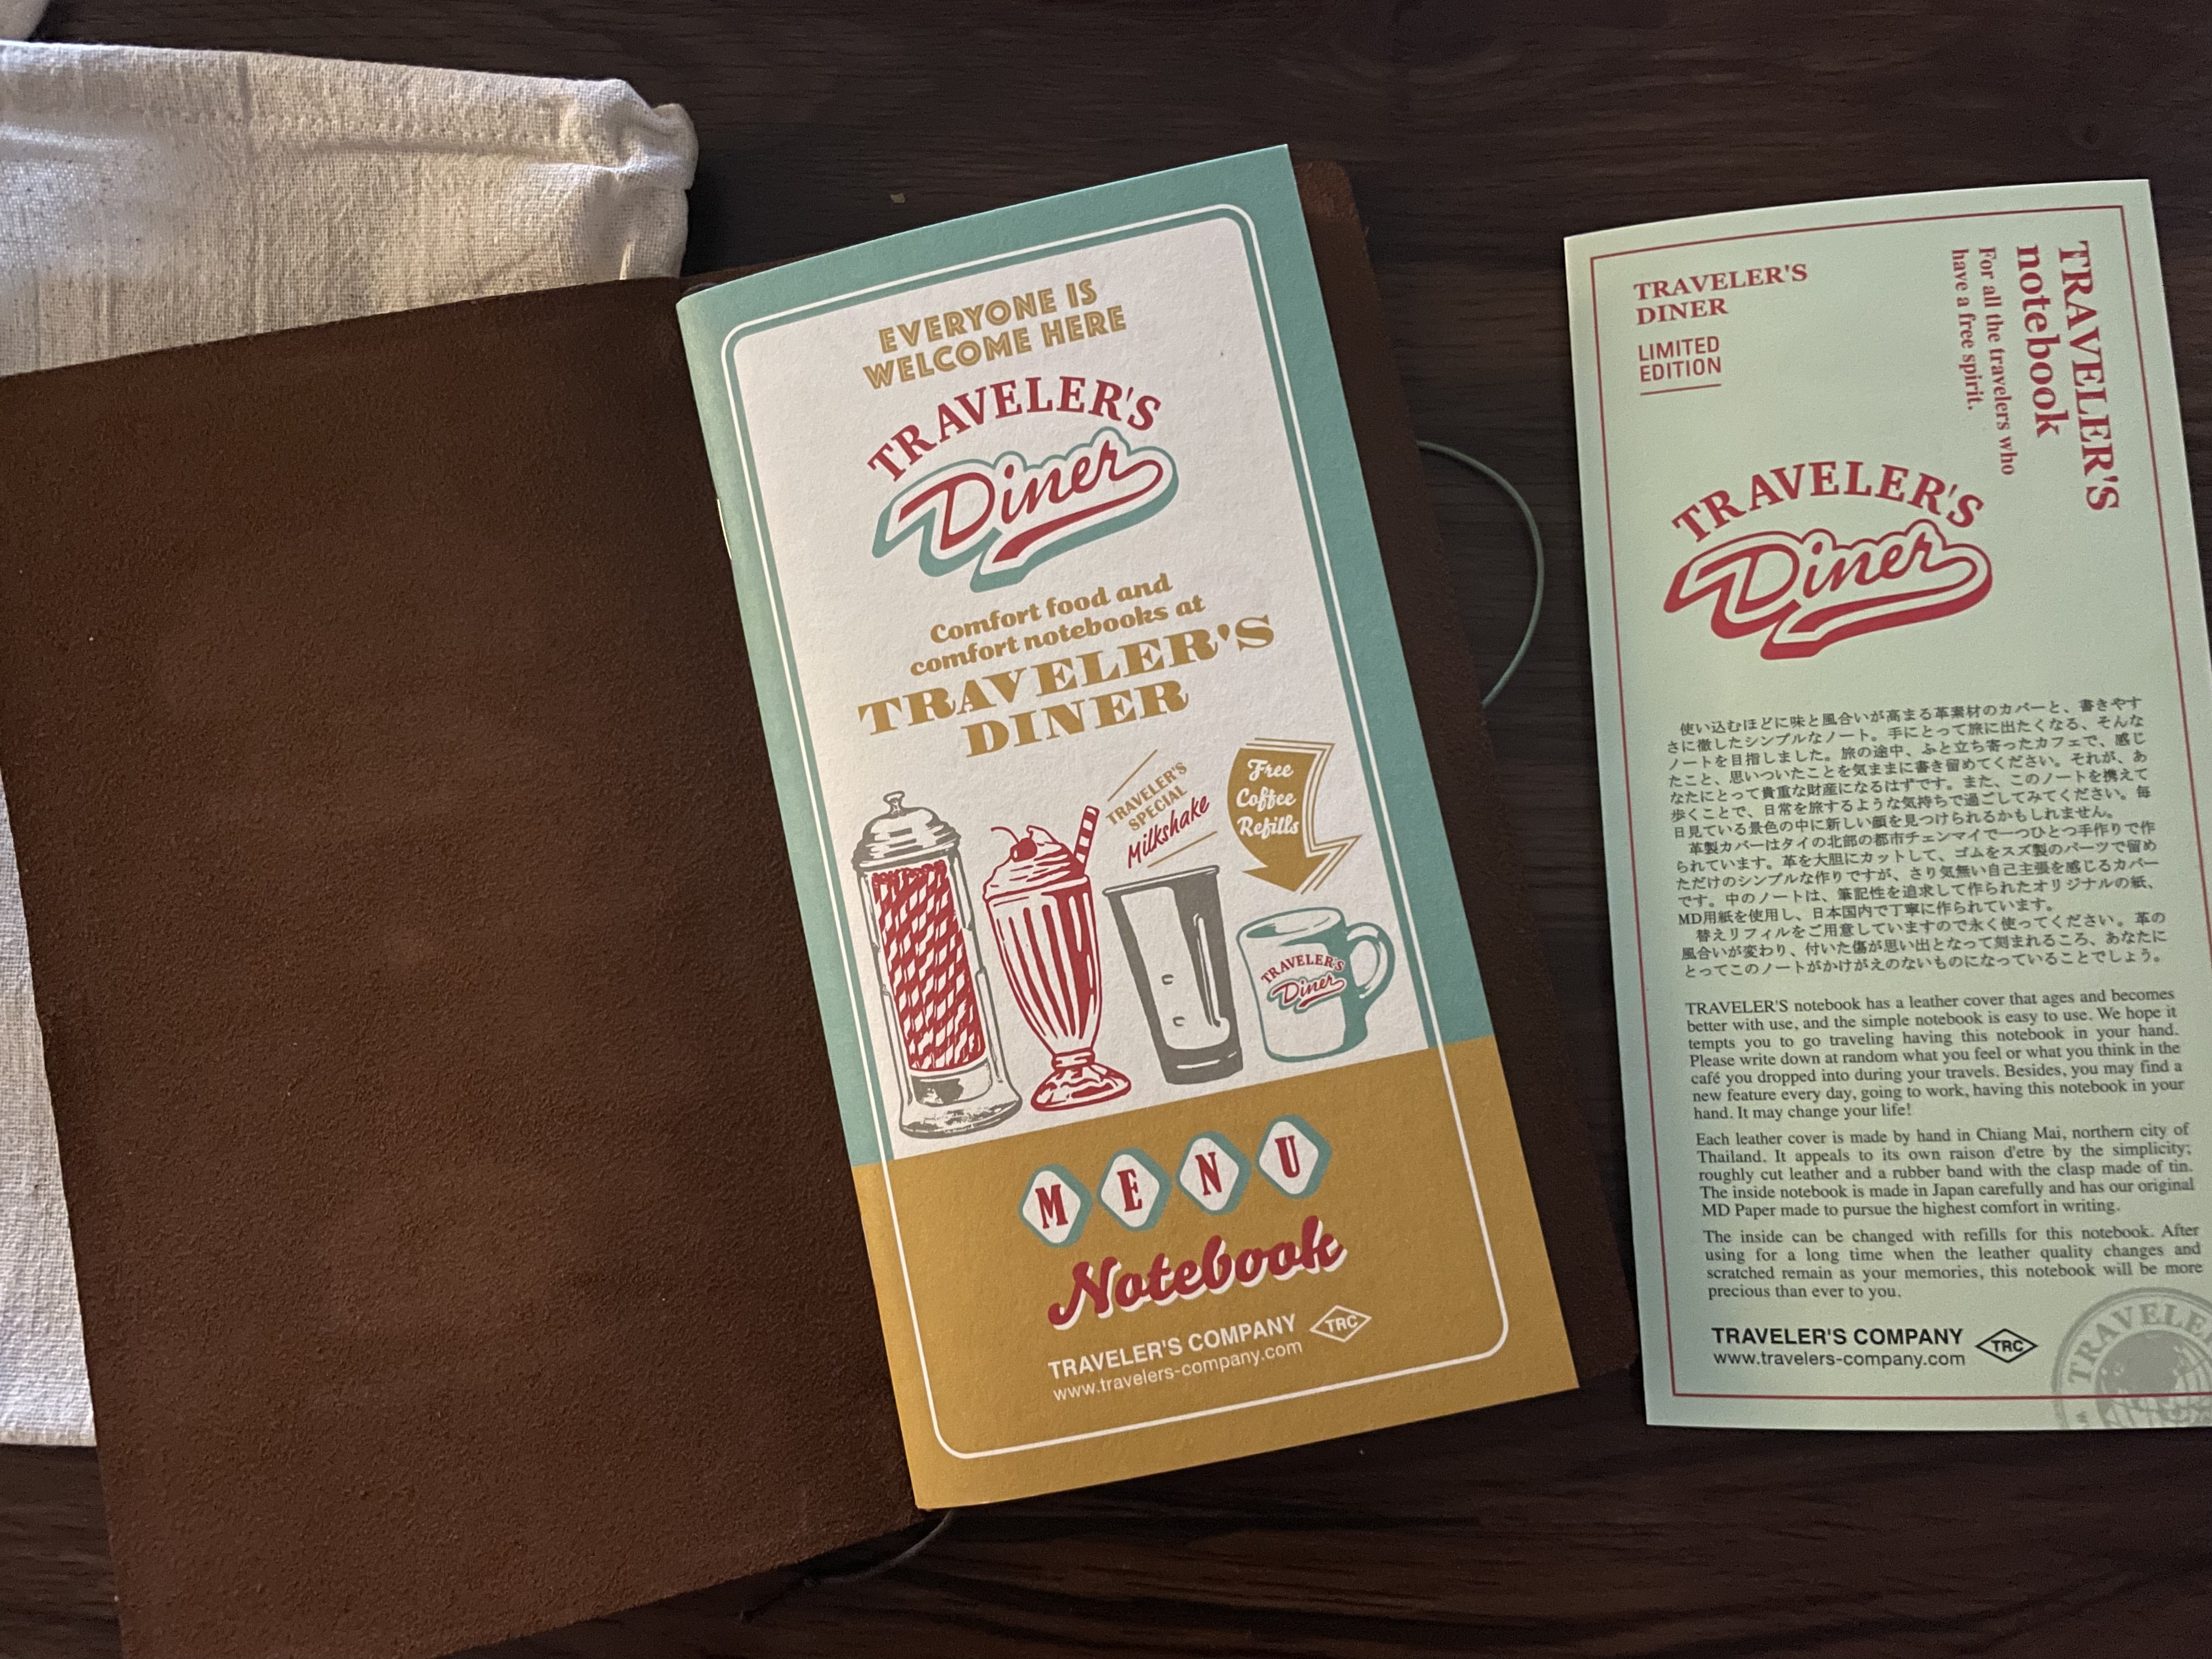 the inside of the traveler's notebook, which has a softcover notebook inside. the softcover notebook's cover looks like the cover of a retro diner's menu